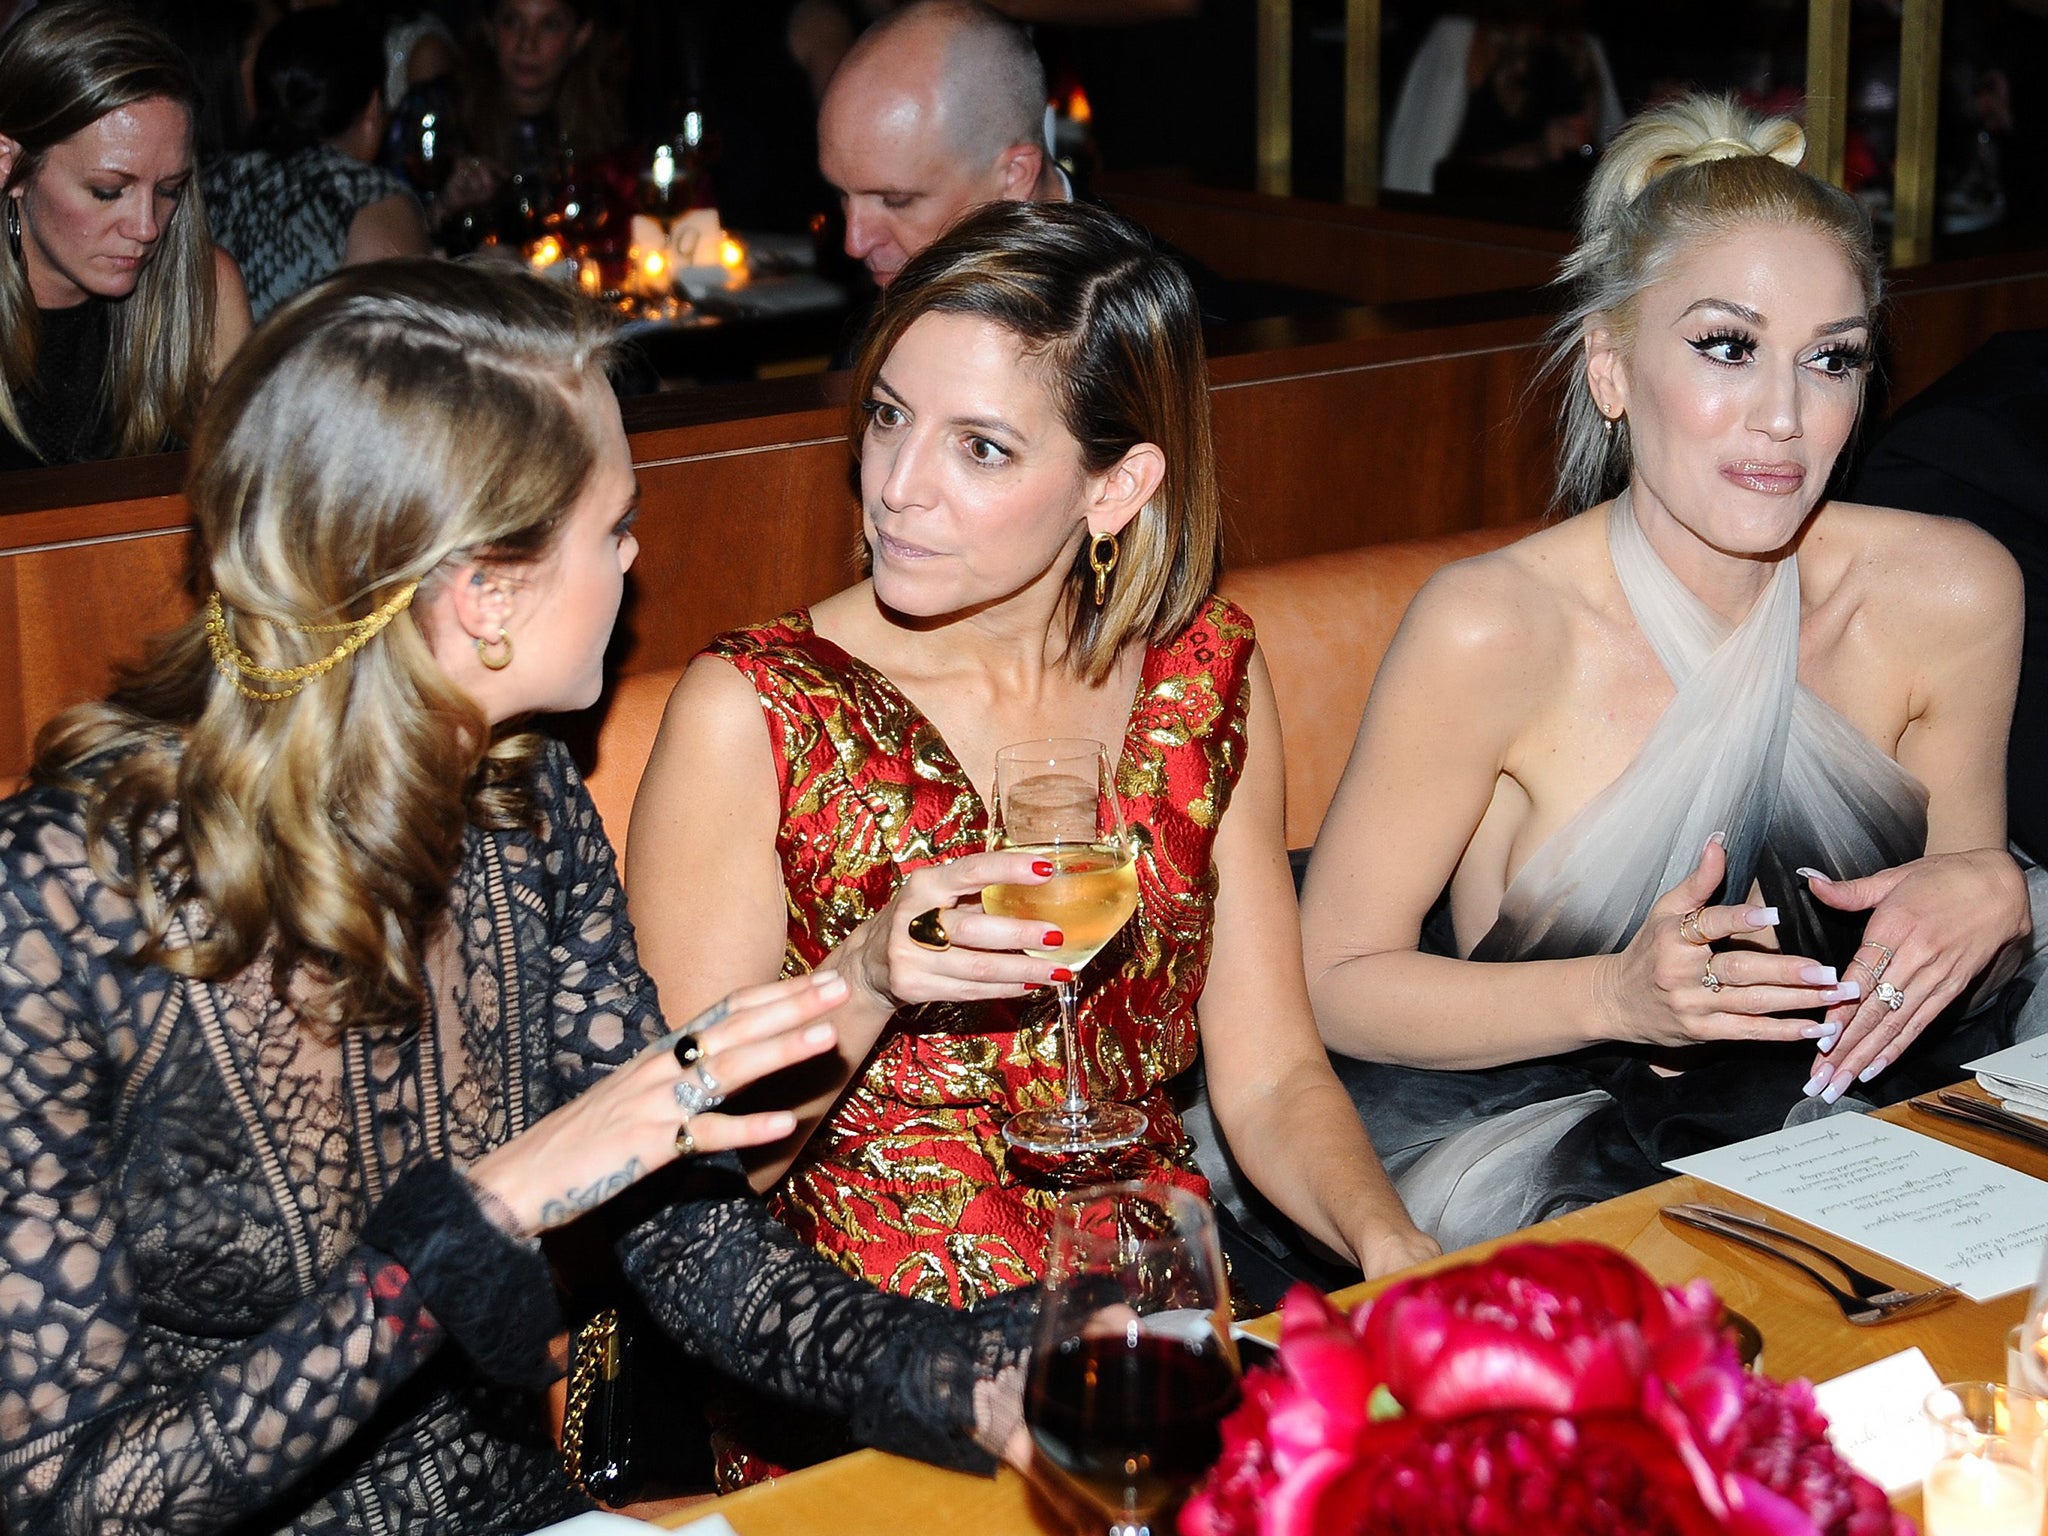 Cara Delevingne, Glamour Editor-in-Chief Cindi Leive and Gwen Stefani